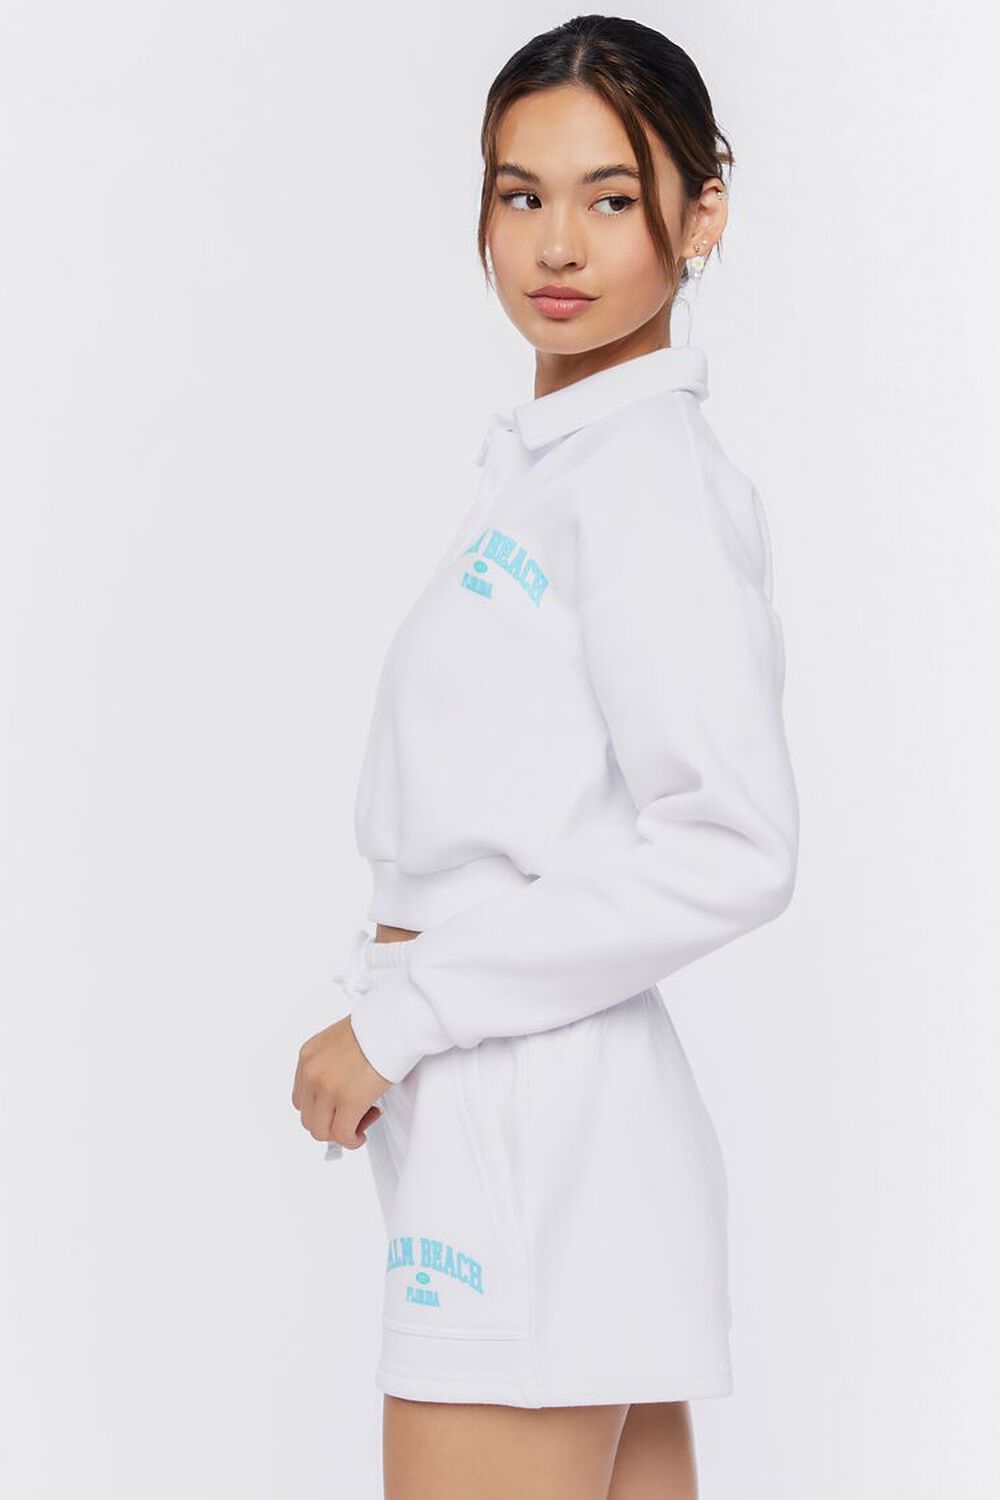 WHITE/BLUE Palm Beach Graphic Pullover, image 2